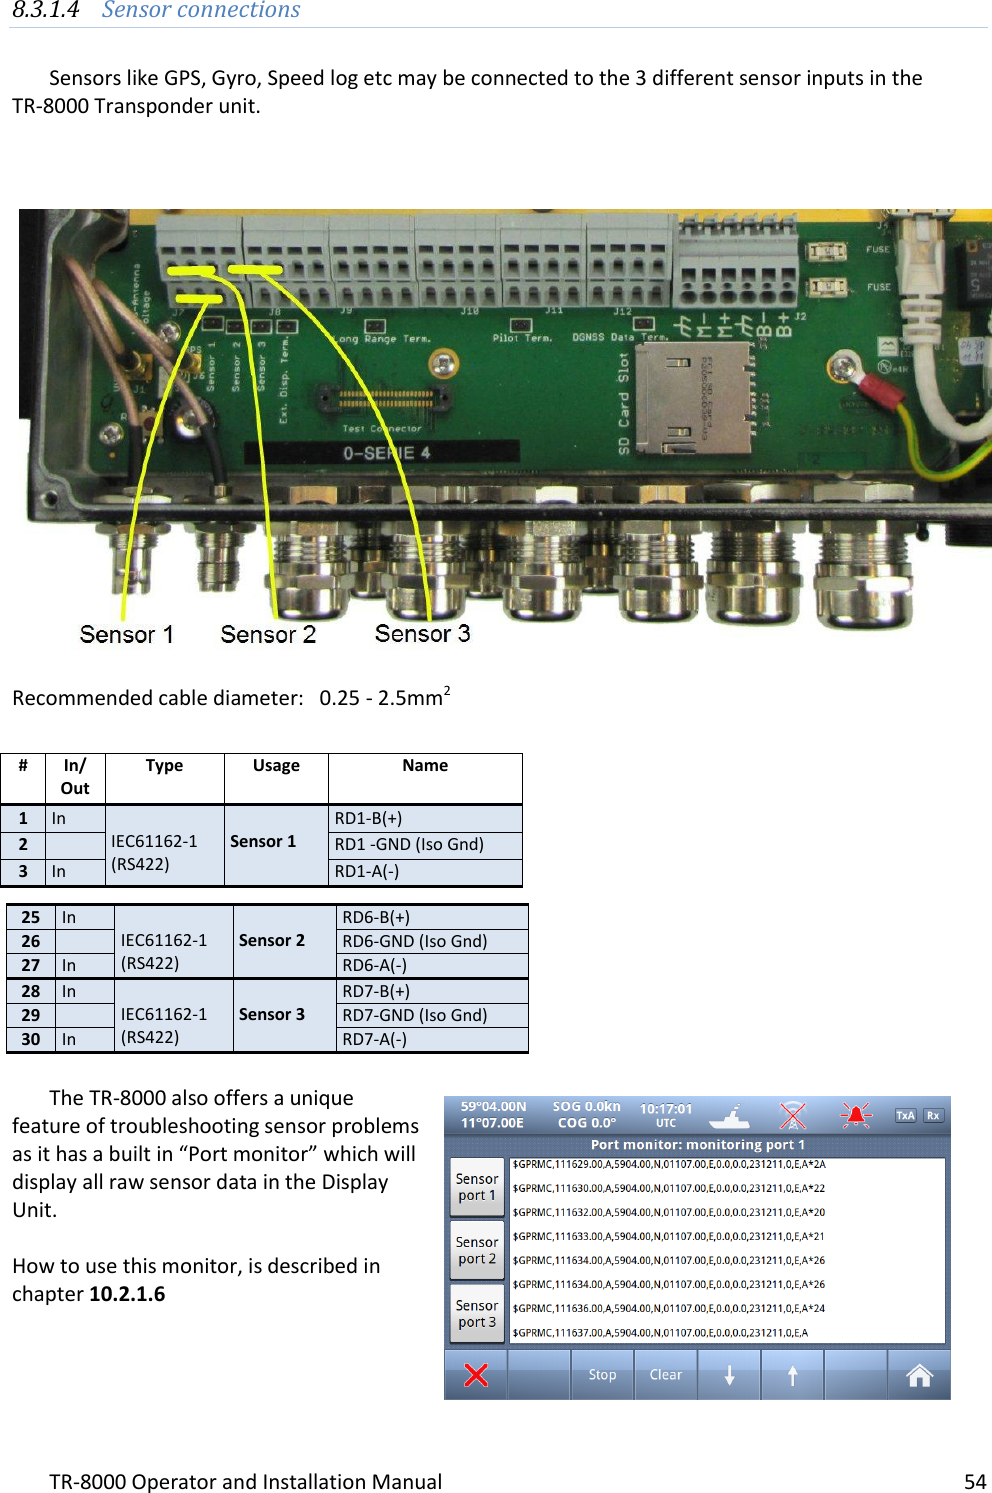 TR-8000 Operator and Installation Manual    54  8.3.1.4 Sensor connections  Sensors like GPS, Gyro, Speed log etc may be connected to the 3 different sensor inputs in the  TR-8000 Transponder unit.      Recommended cable diameter:   0.25 - 2.5mm2              The TR-8000 also offers a unique feature of troubleshooting sensor problems as it has a built in “Port monitor” which will display all raw sensor data in the Display Unit.  How to use this monitor, is described in chapter 10.2.1.6  # In/ Out Type Usage Name 1 In  IEC61162-1 (RS422)  Sensor 1 RD1-B(+) 2  RD1 -GND (Iso Gnd) 3 In RD1-A(-) 25 In  IEC61162-1 (RS422)  Sensor 2 RD6-B(+) 26  RD6-GND (Iso Gnd) 27 In RD6-A(-) 28 In  IEC61162-1 (RS422)  Sensor 3 RD7-B(+) 29  RD7-GND (Iso Gnd) 30 In RD7-A(-) 